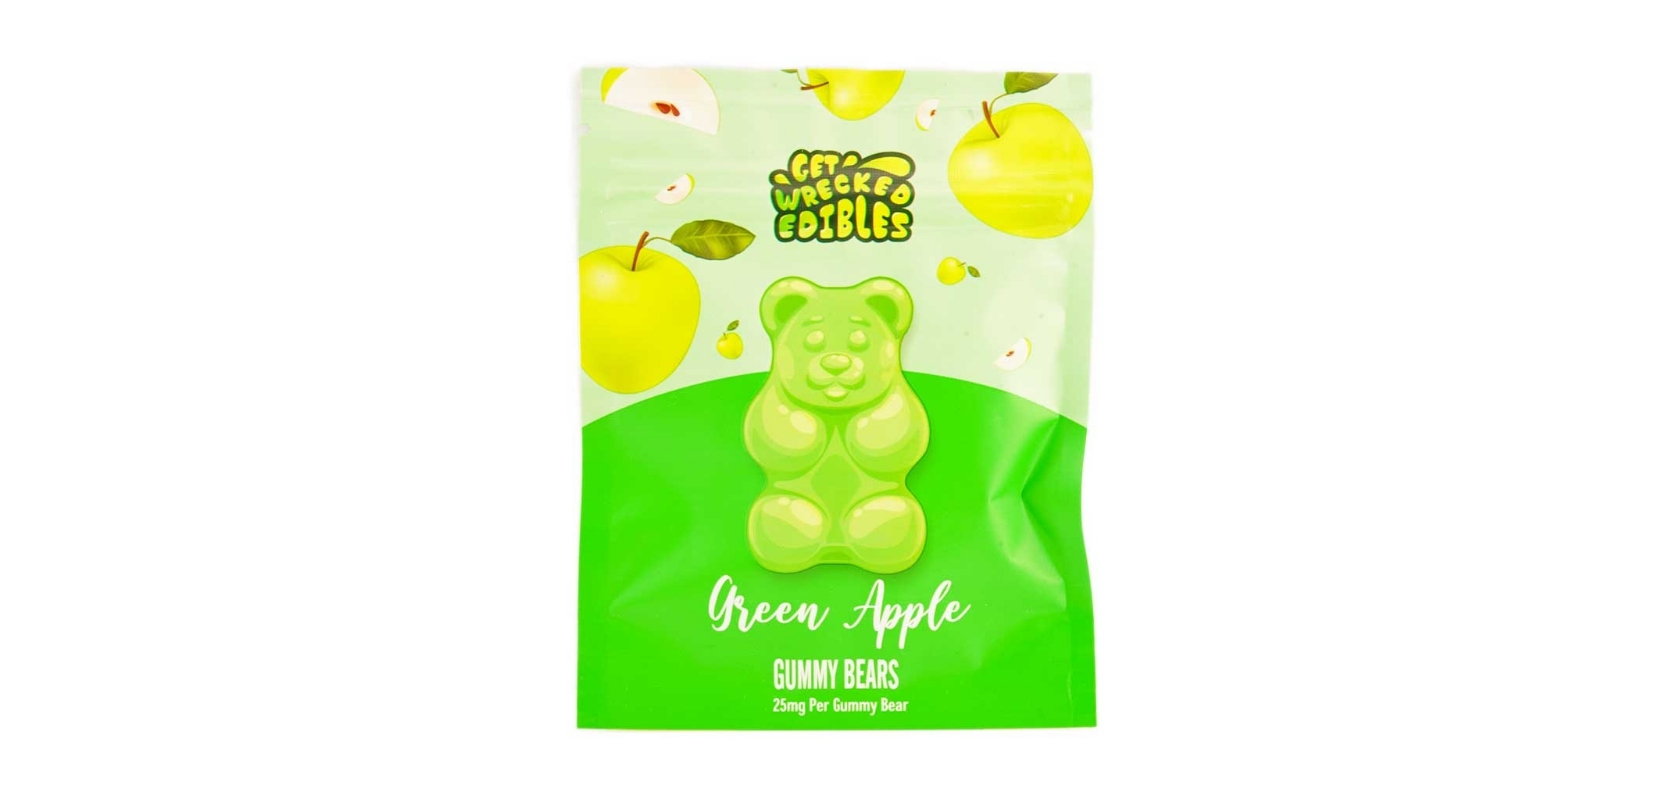 The Get Wrecked Edibles - Green Apple Gummy Bears THC is a fantastic option for stoners on the go. 